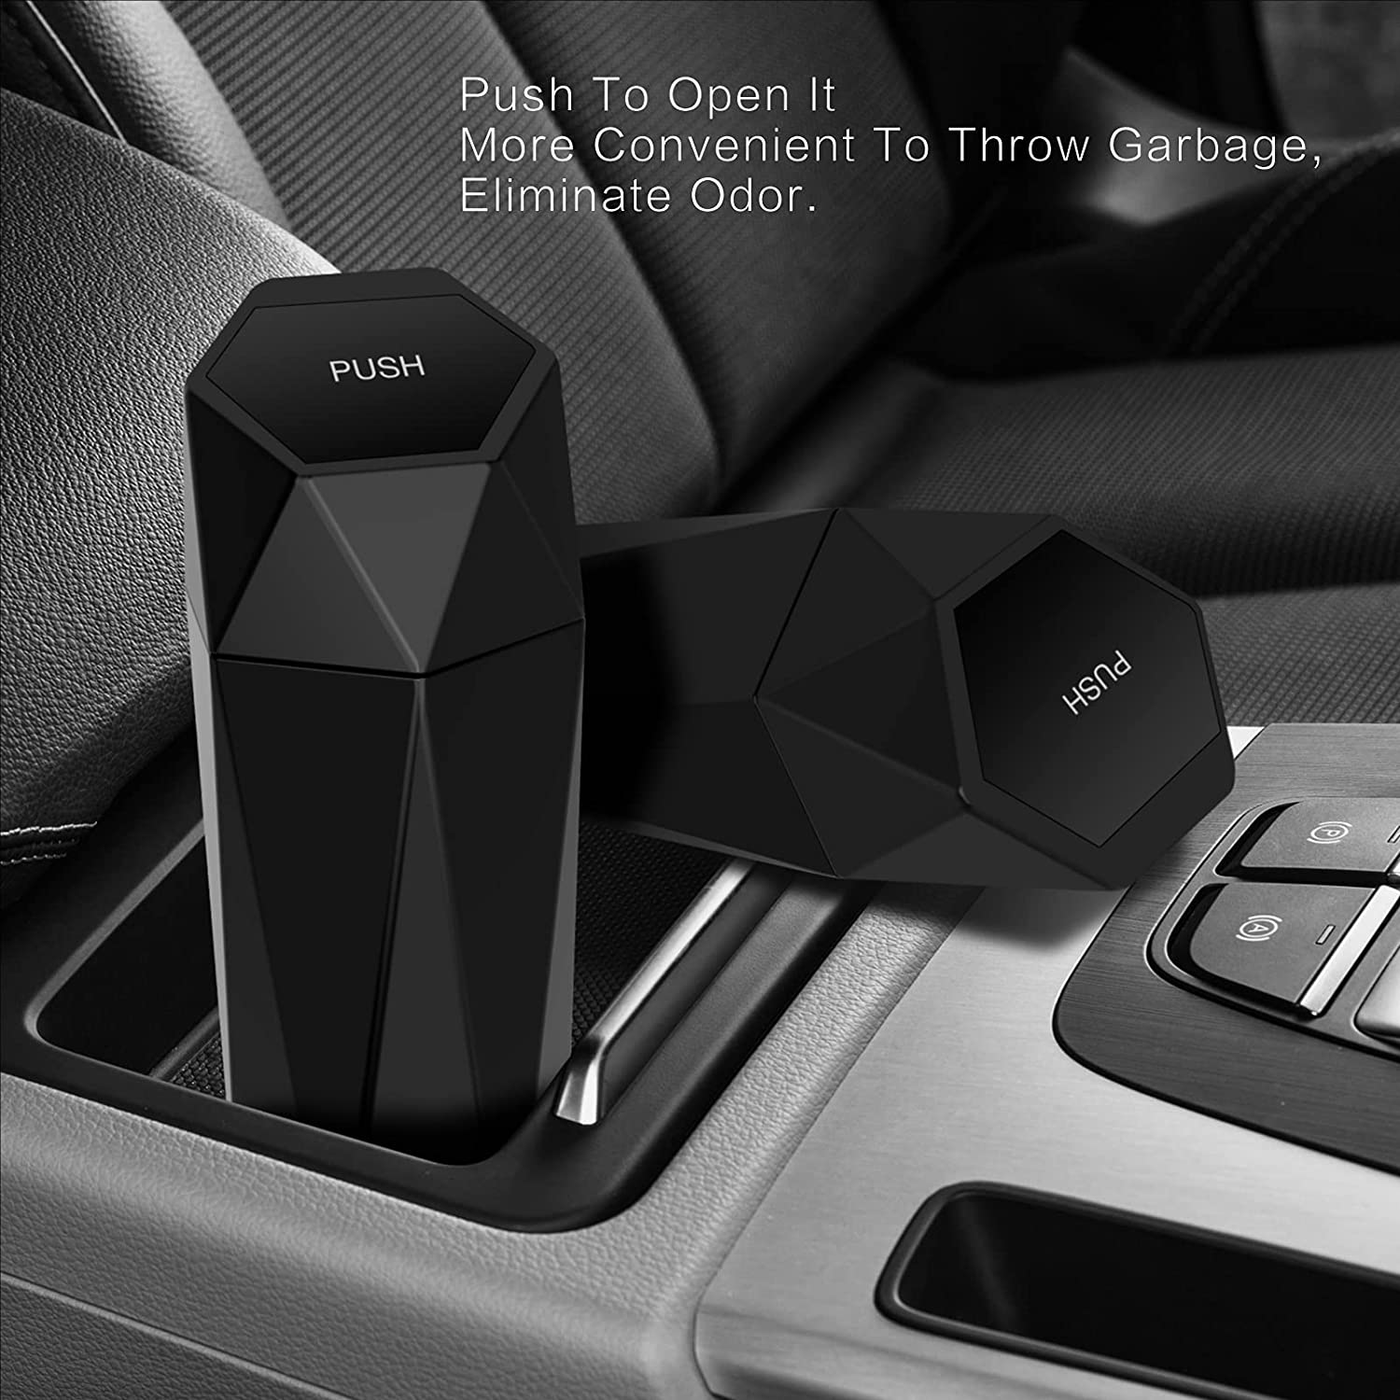 SZEOF Car Trash Can with Lid,Portable Vehicle Auto Car Garbage Can,Diamond Design Mini Garbage Bin for Automotive Car, Home, Office, Kitchen, Bedroom(1 Pack,Black)